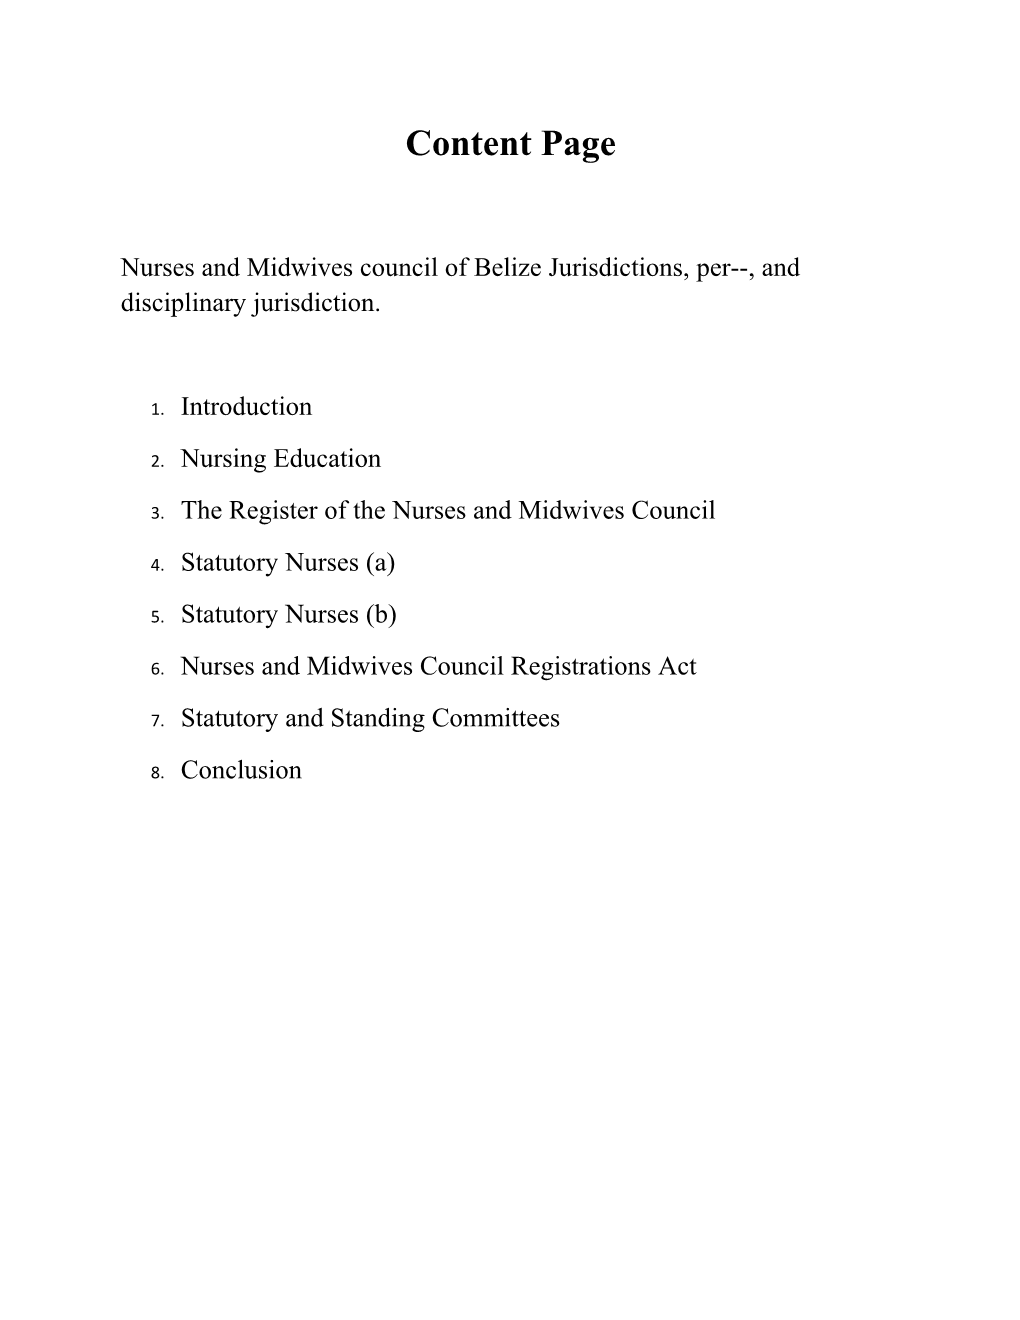 Nurses and Midwives Council of Belize Jurisdictions, Per , and Disciplinary Jurisdiction